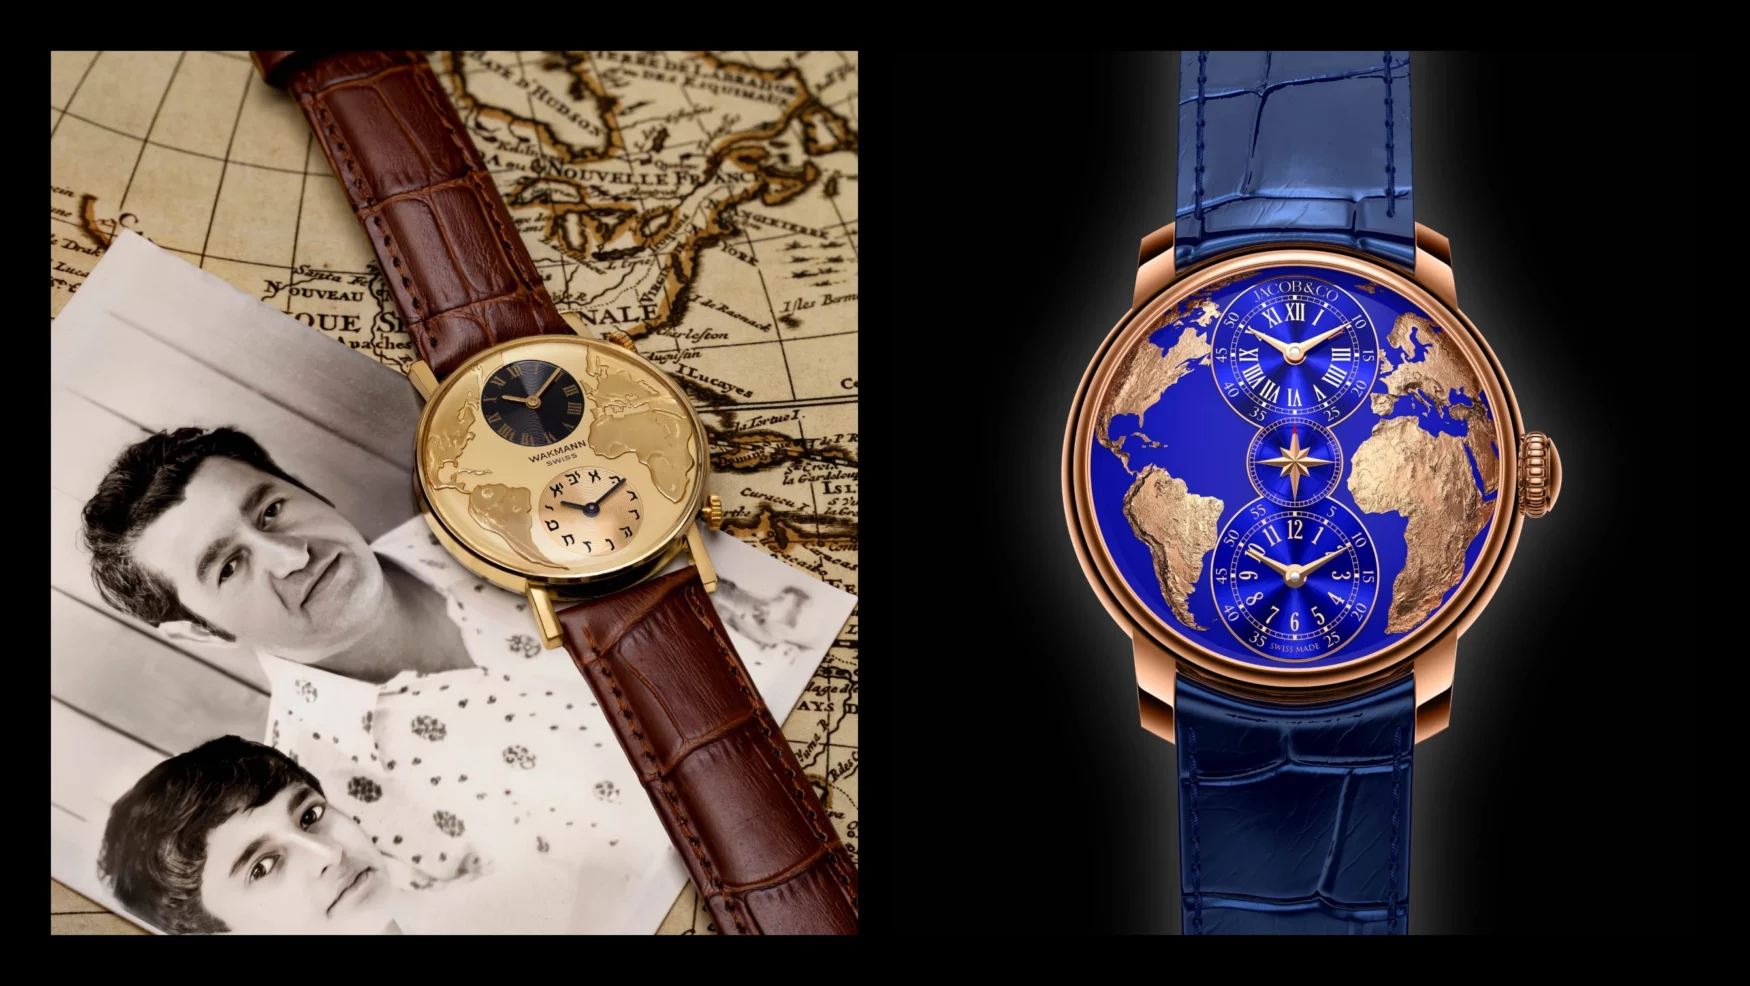 The new Jacob & Co. The World Is Yours Dual Time Zone is a tribute to the watch that started it all